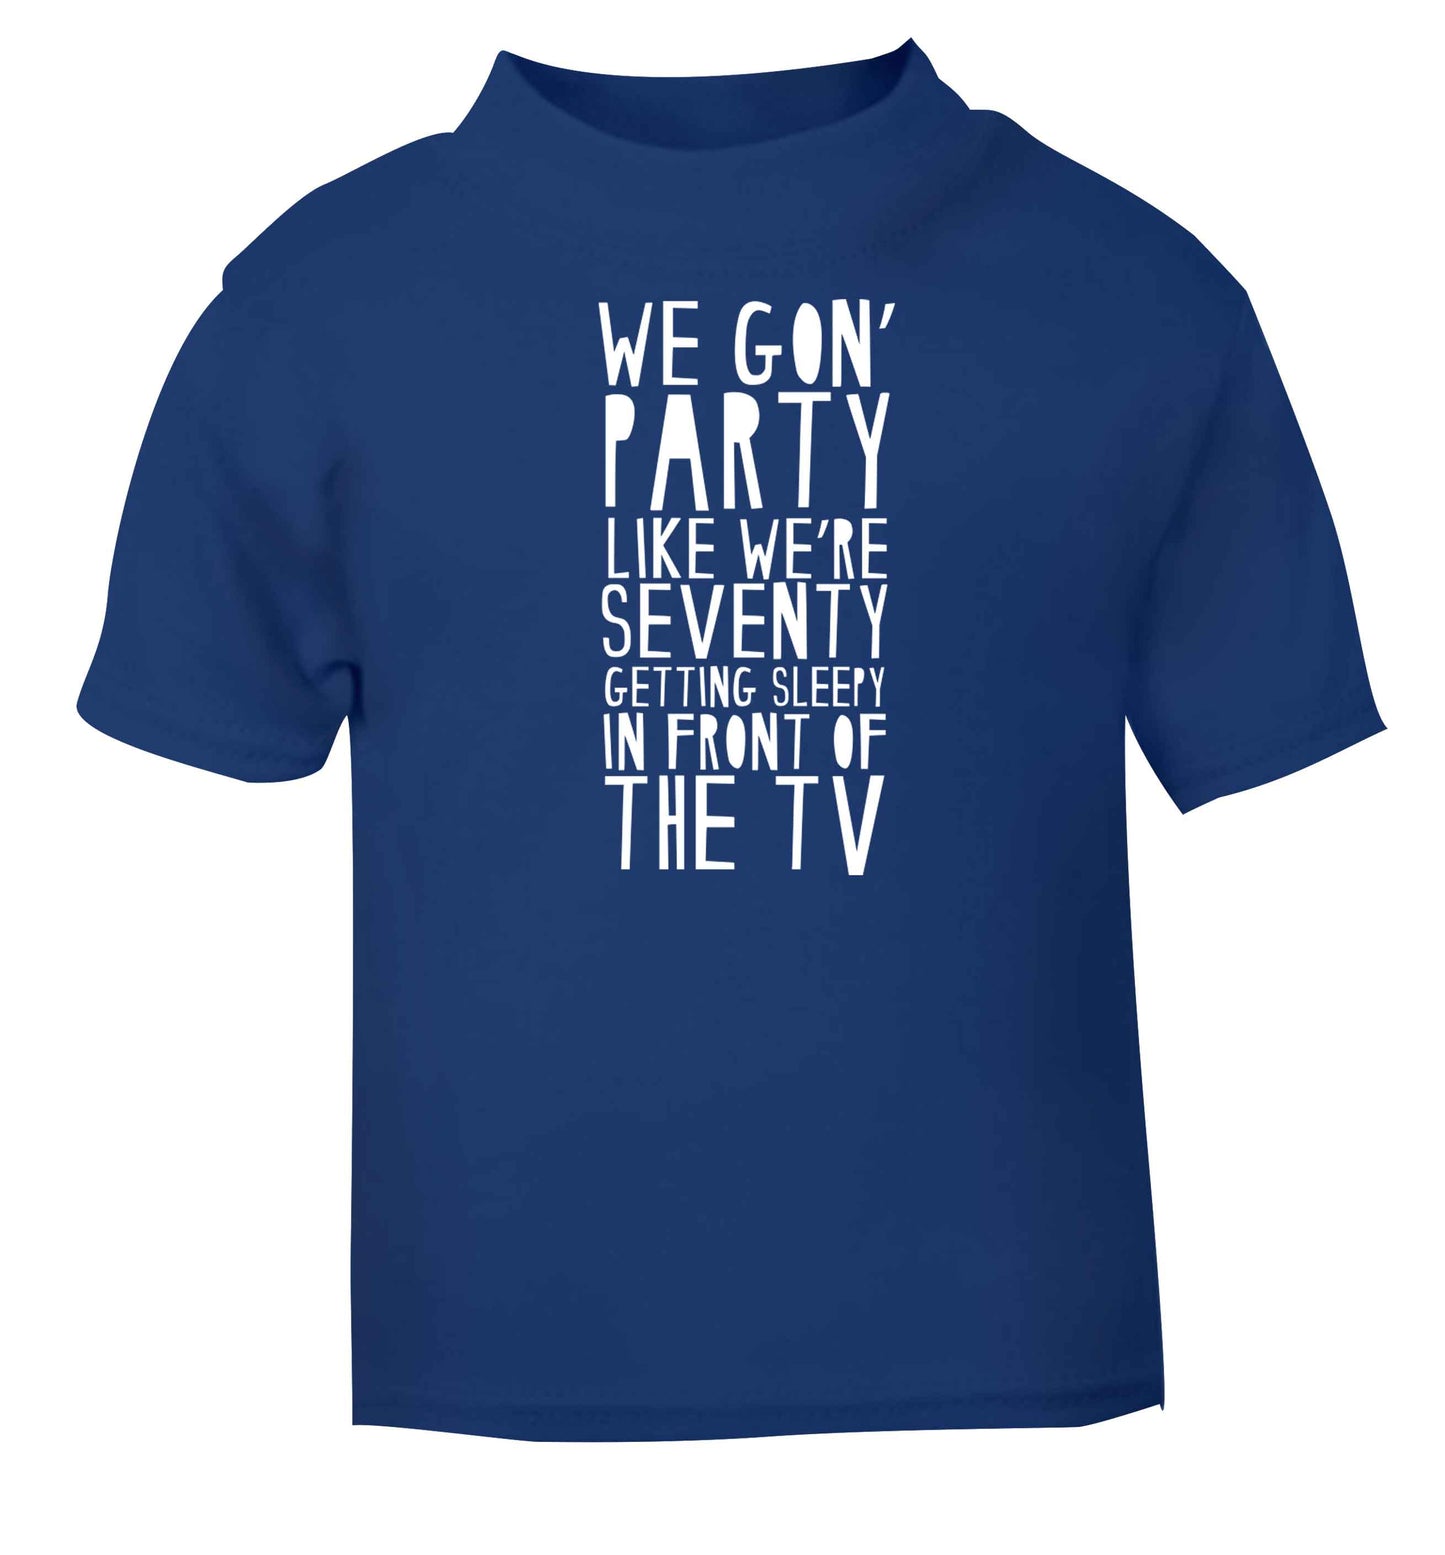 We gon' party like we're seventy getting sleepy in front of the TV blue baby toddler Tshirt 2 Years